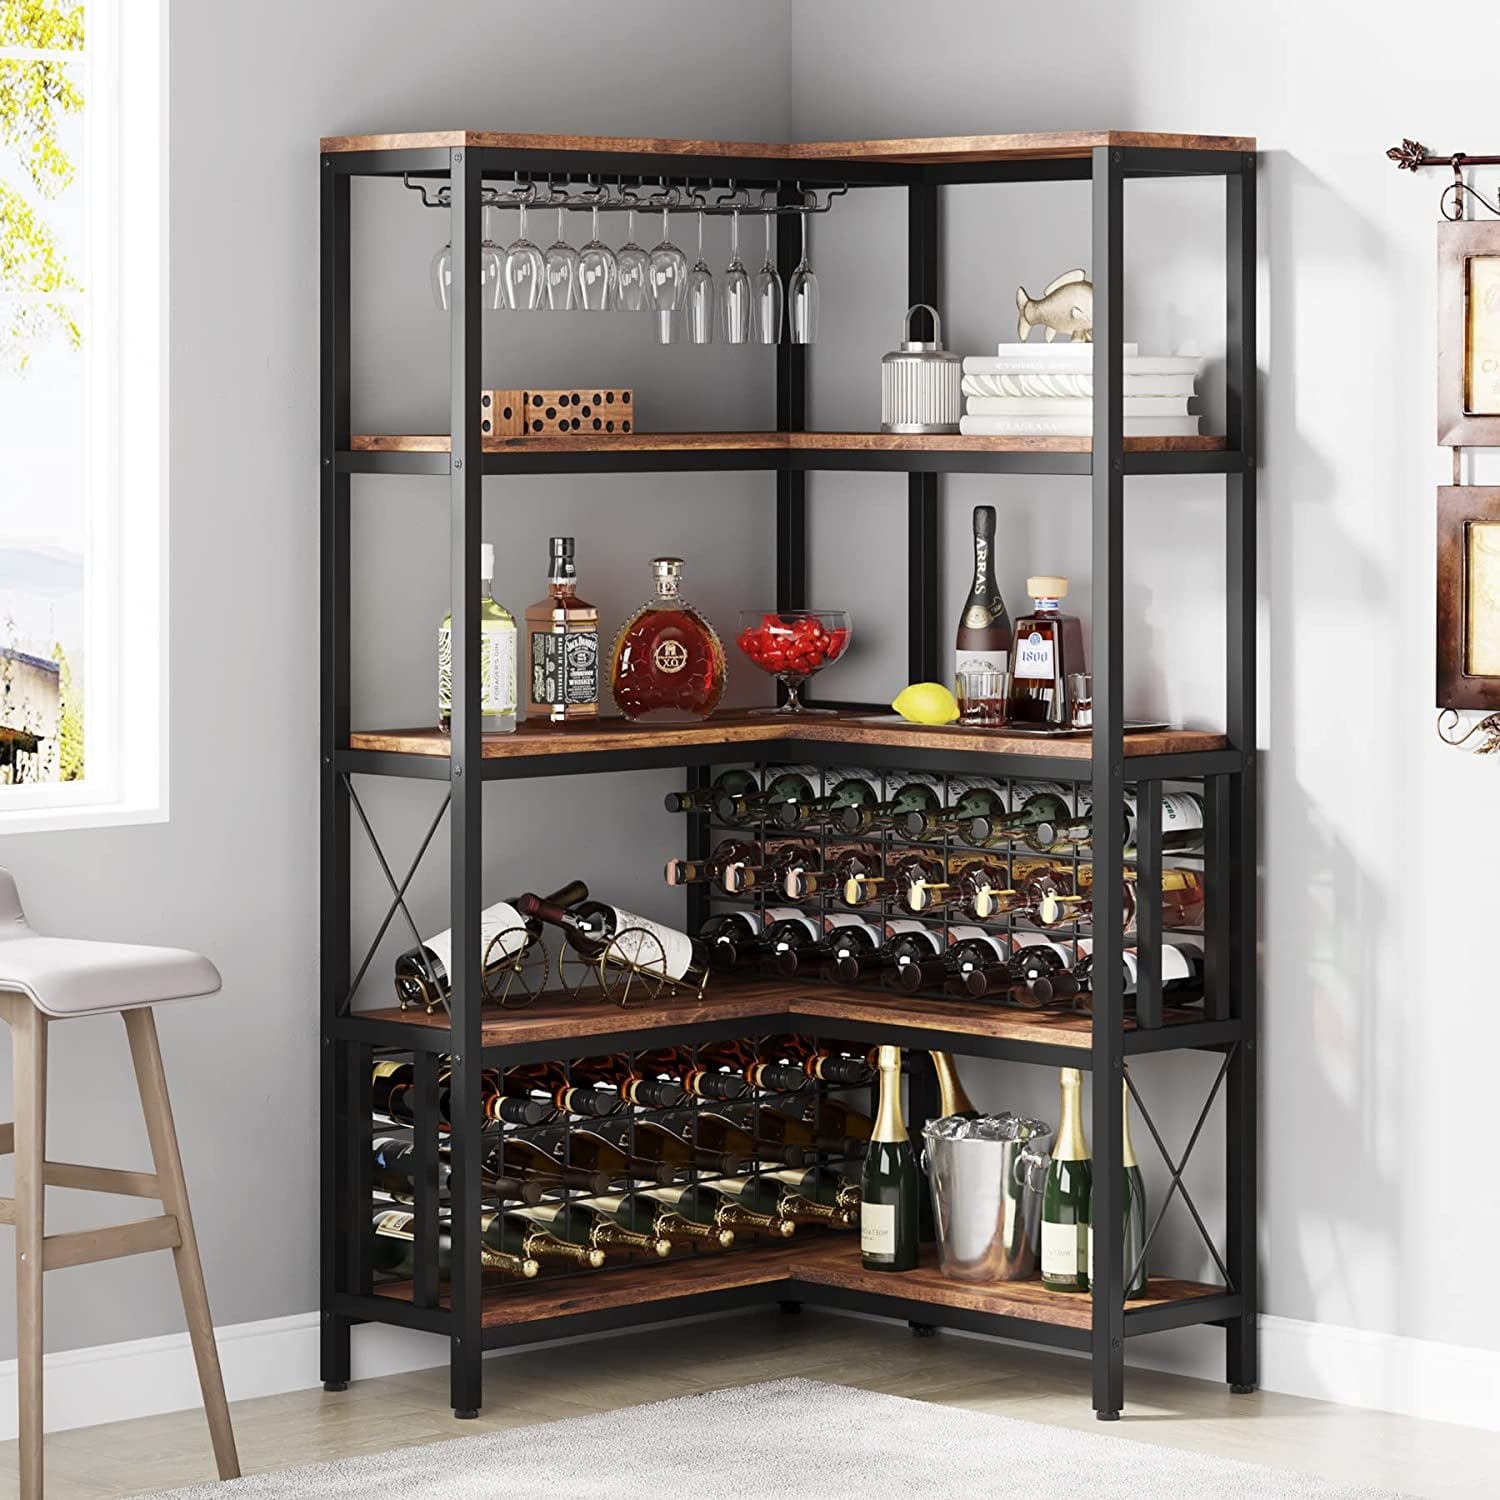 https://ak1.ostkcdn.com/images/products/is/images/direct/e97acac5cdd896997cdef532ad7cb219d96d30b7/Large-Corner-Wine-Rack%2C-5-Tier-L-Shaped-Industrial-Freestanding-Floor-Bar-Cabinets-for-Liquor-and-Glasses-Storage.jpg